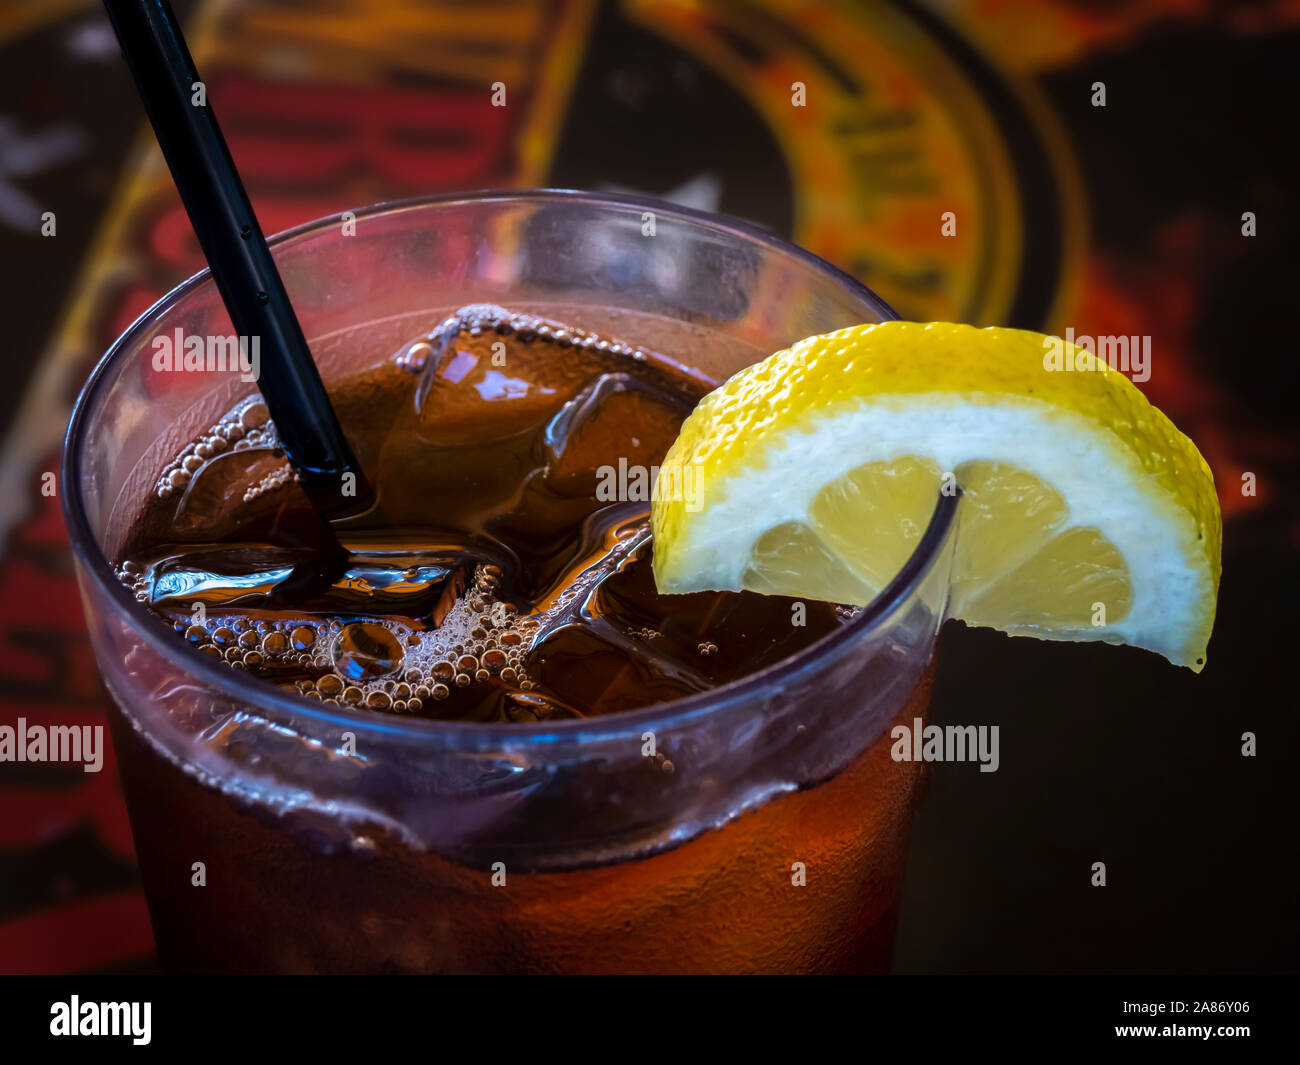 Cloaeup of top rim of glass filled with Iced Tea with a lemon slice and straw Stock Photo